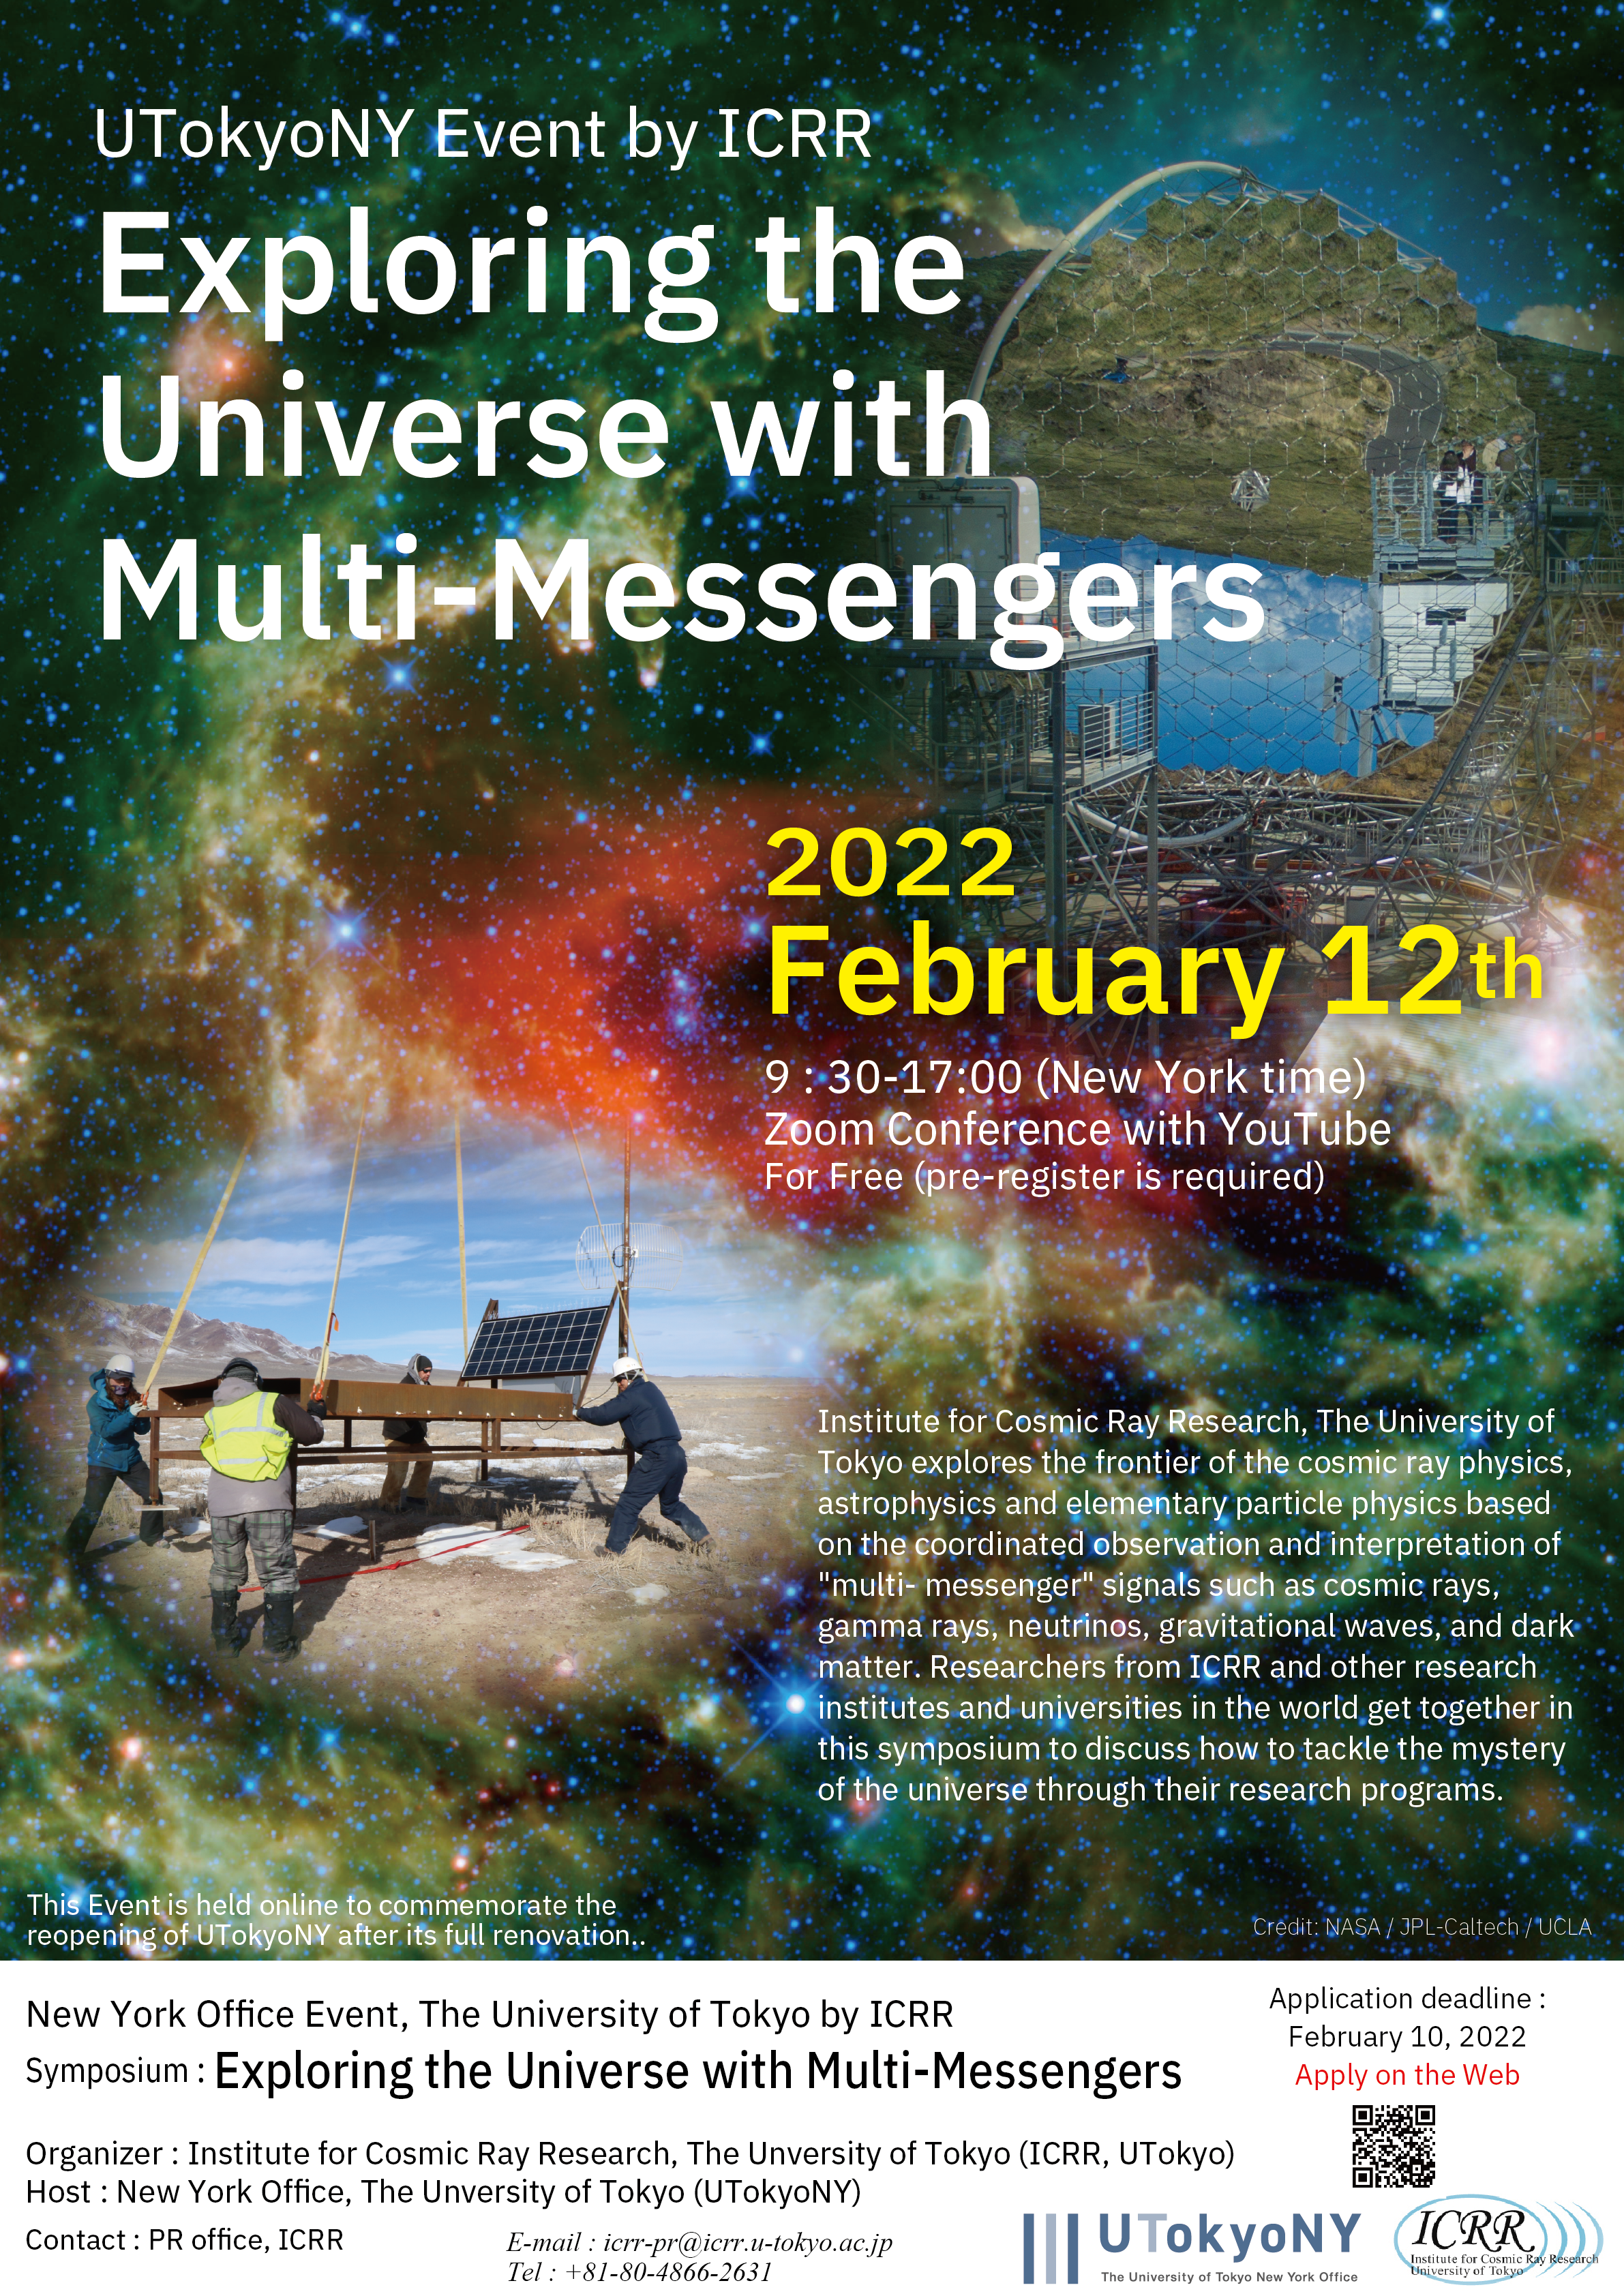 【Adding Event Report】Symposium “Exploring the Universe with Multi-Messengers”